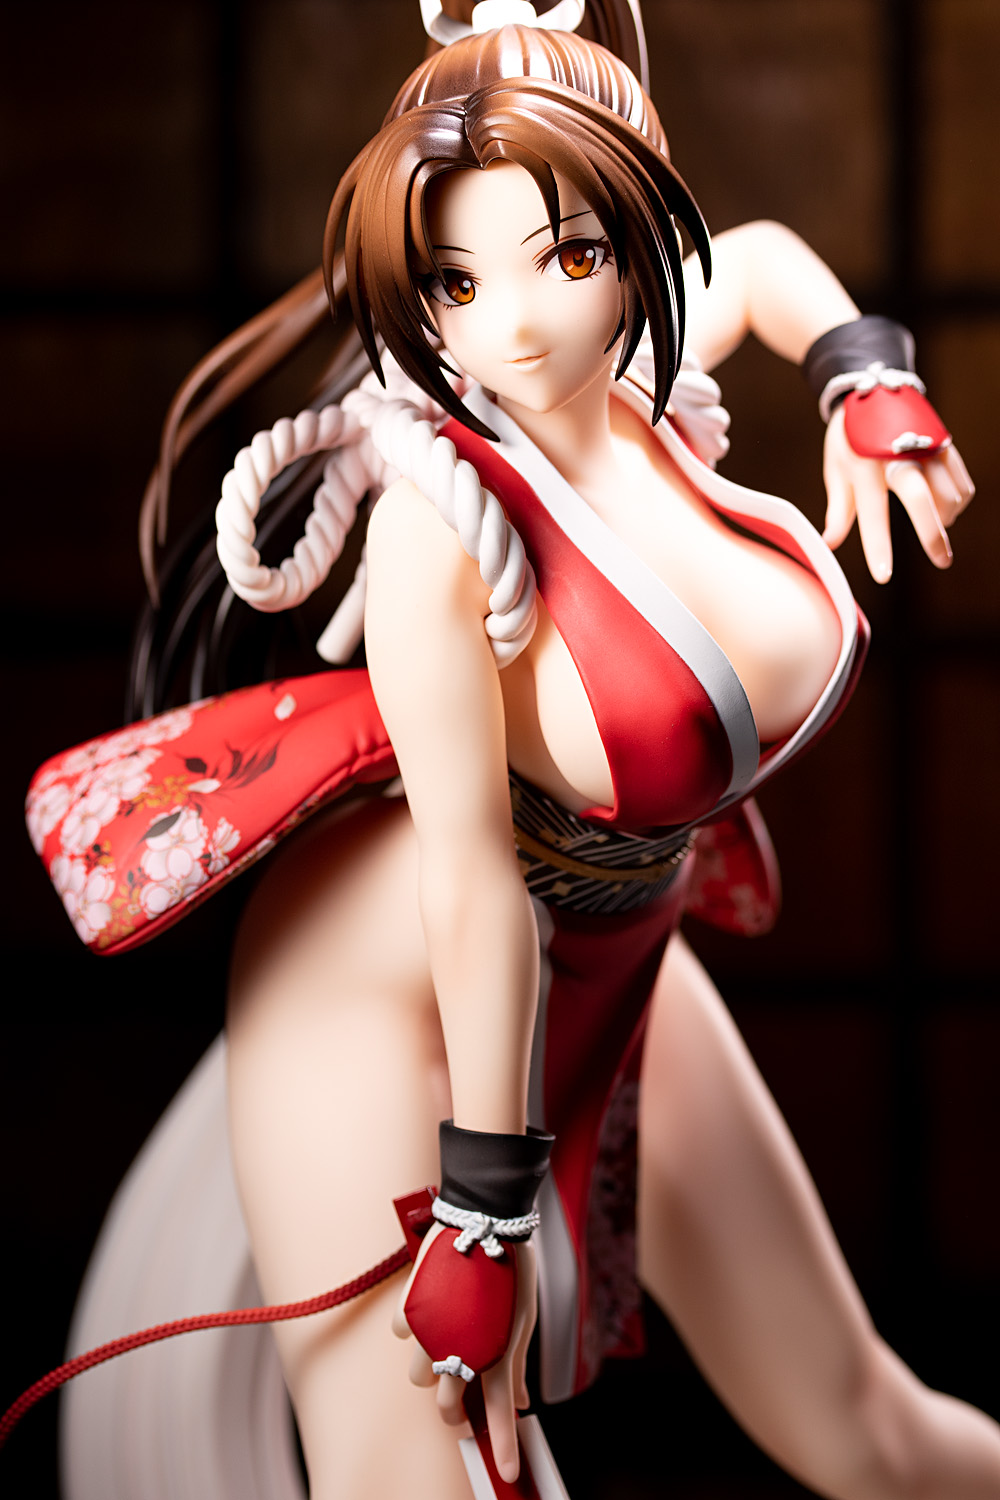 Mai Shiranui from The King of Fighters XIV